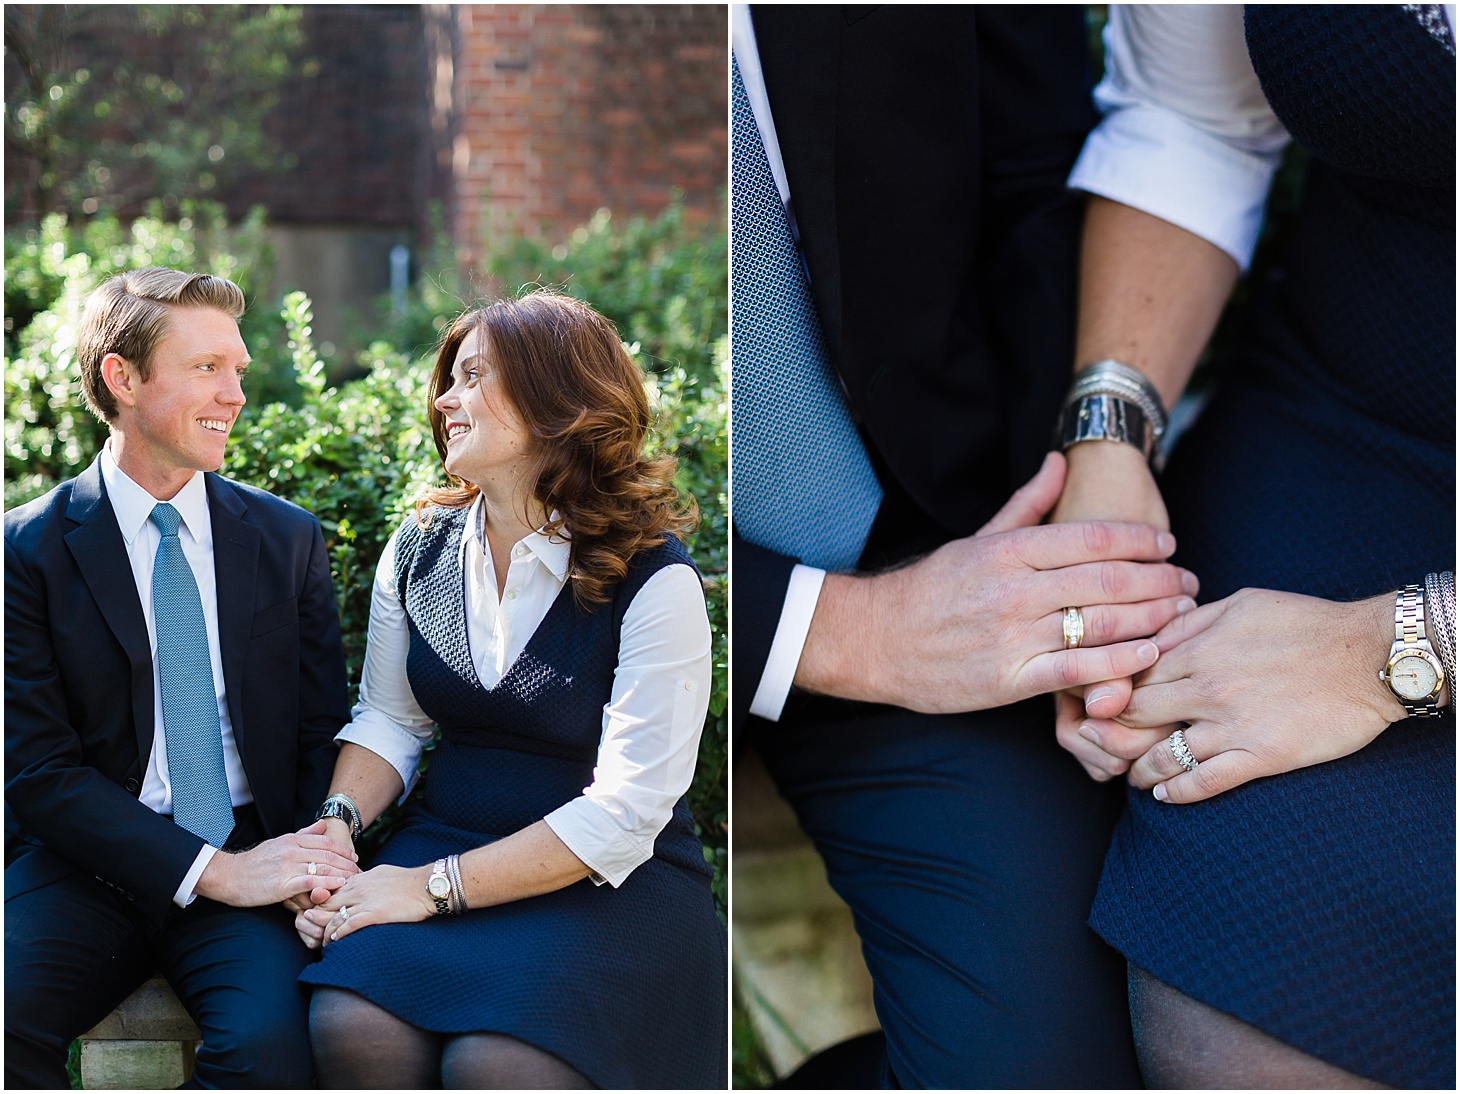 Afternoon Engagement Session in Georgetown | Preppy Autumn Engagement Session in Georgetown | Sarah Bradshaw Photography